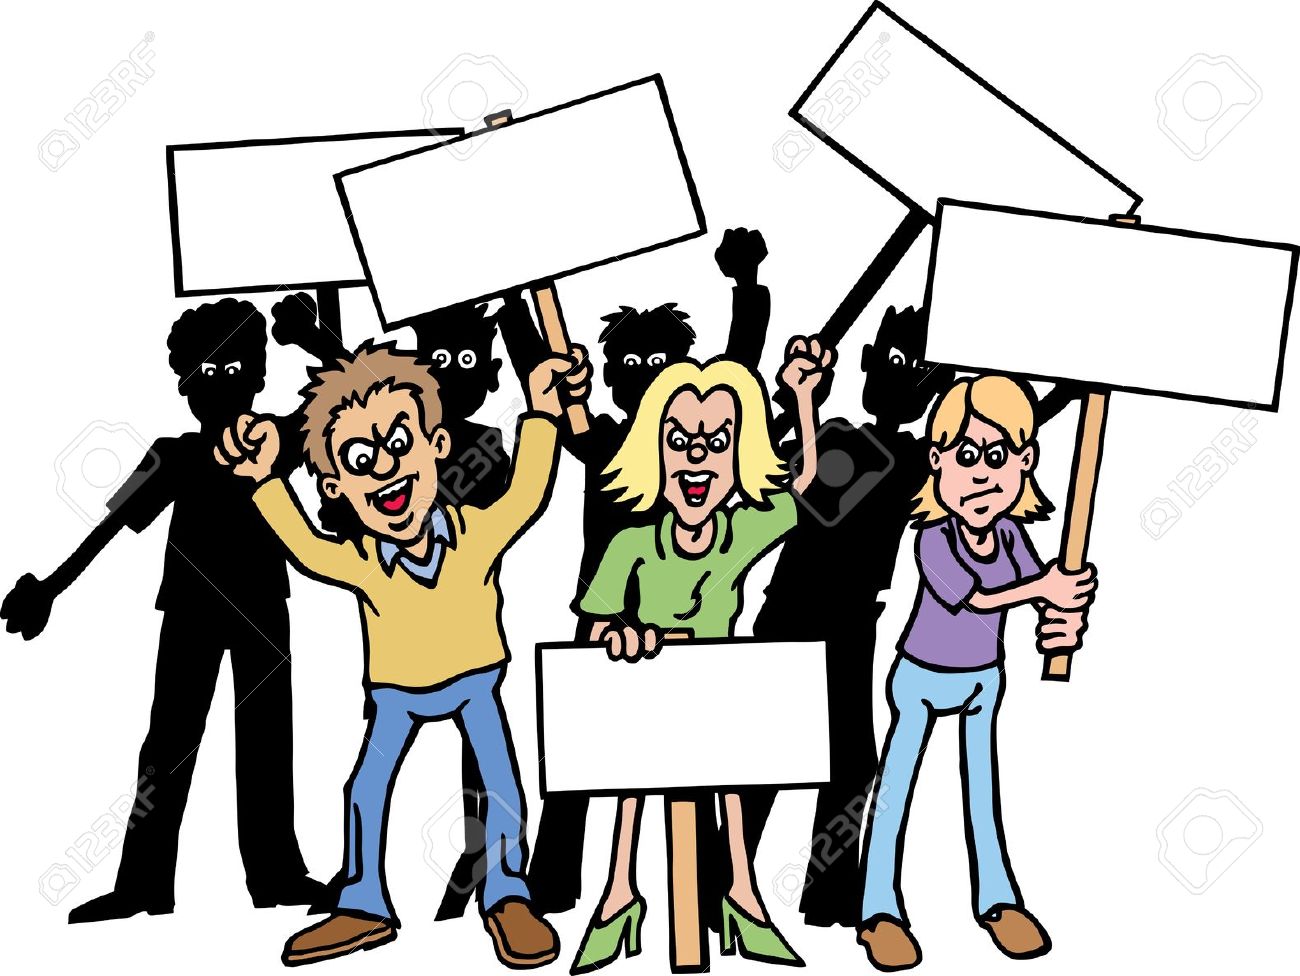 Protest clipart clipground jpg